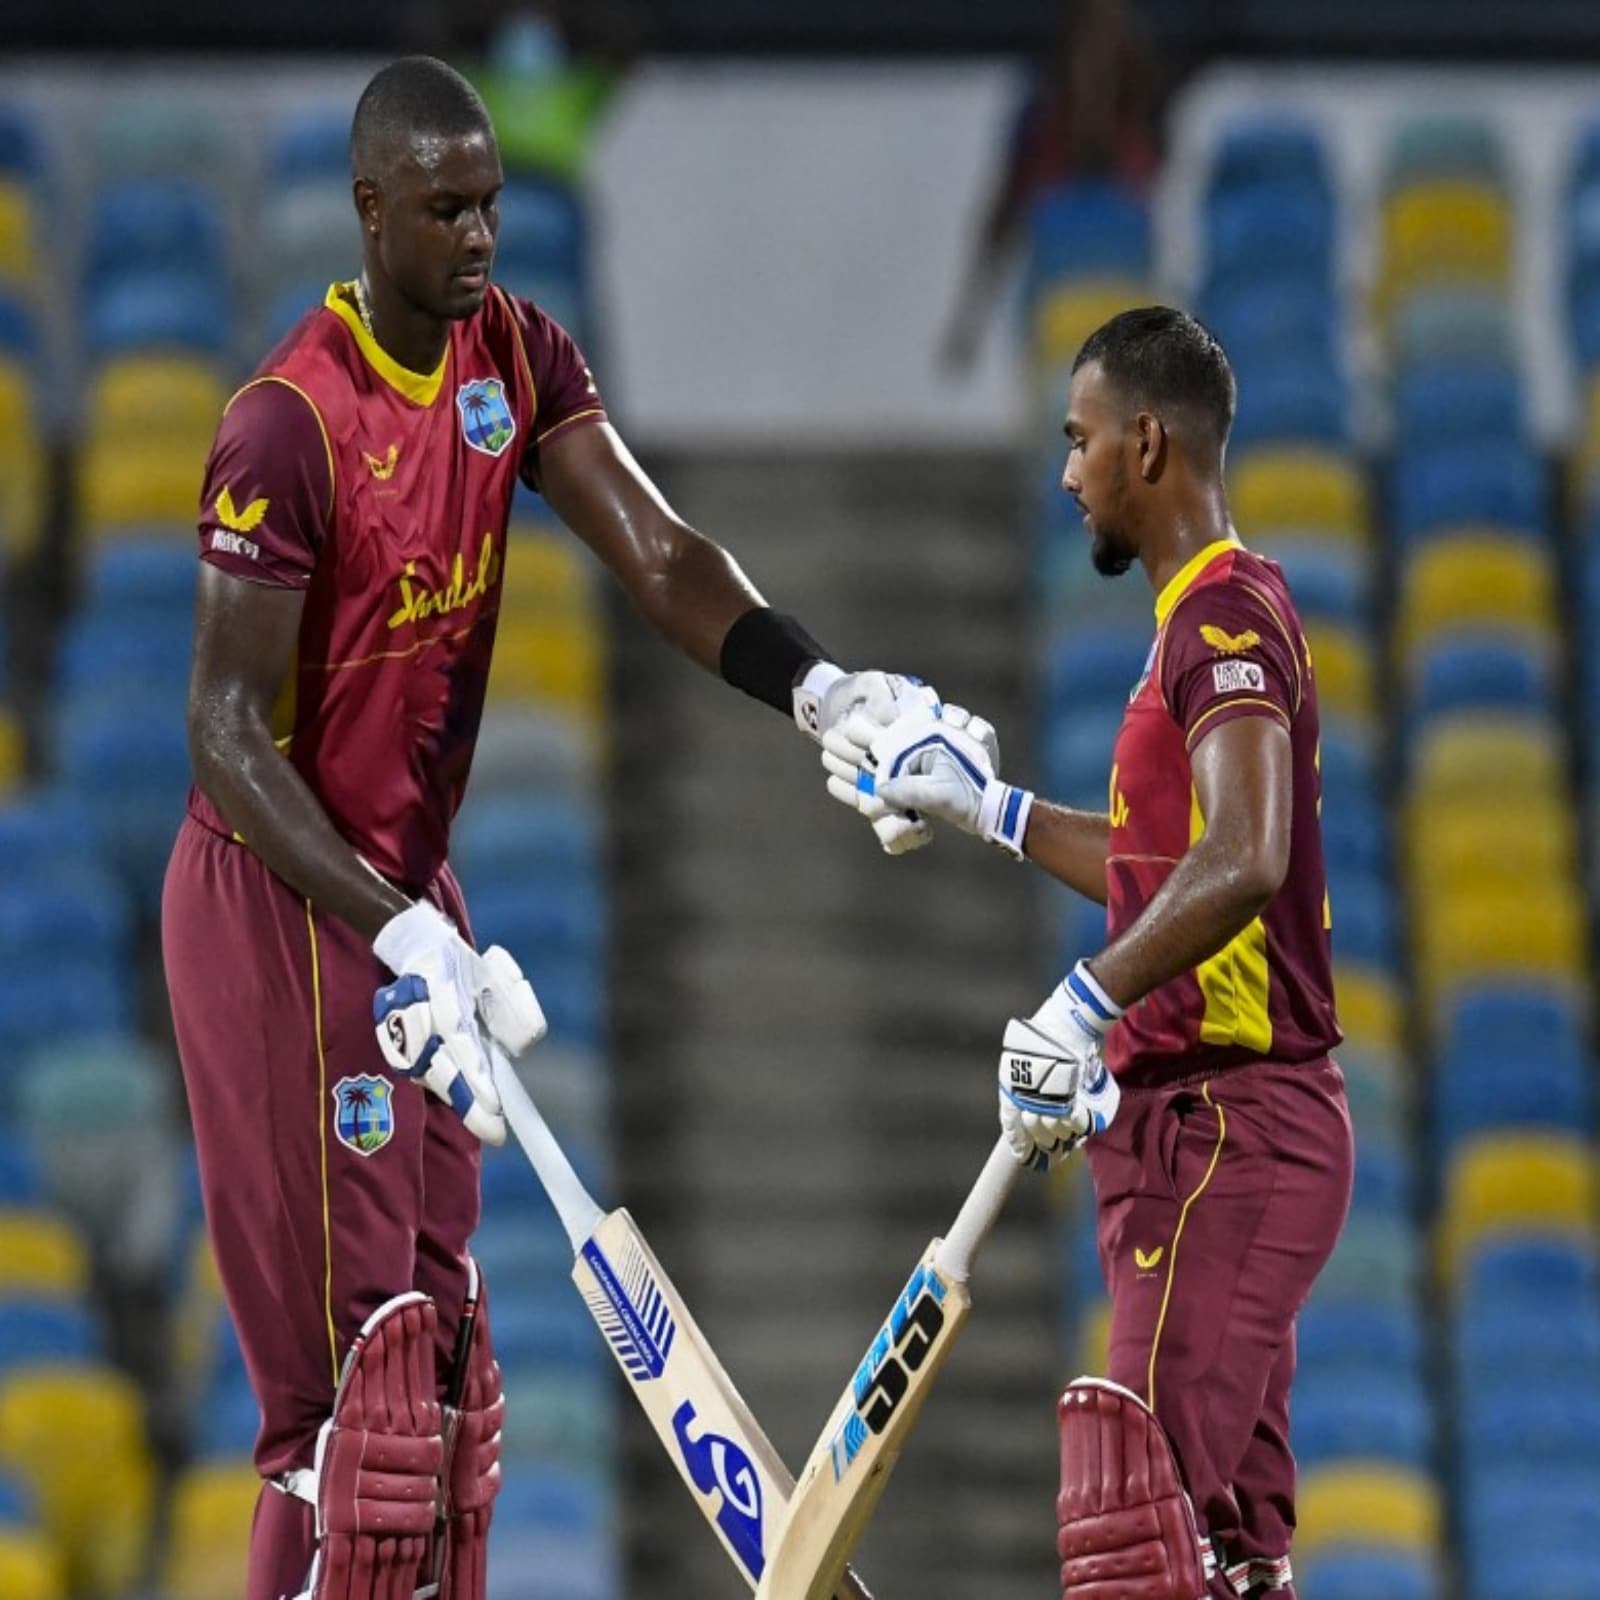 WI vs PAK, 1st T20I Live Streaming When and Where to Watch West Indies vs Pakistan Live Streaming Online